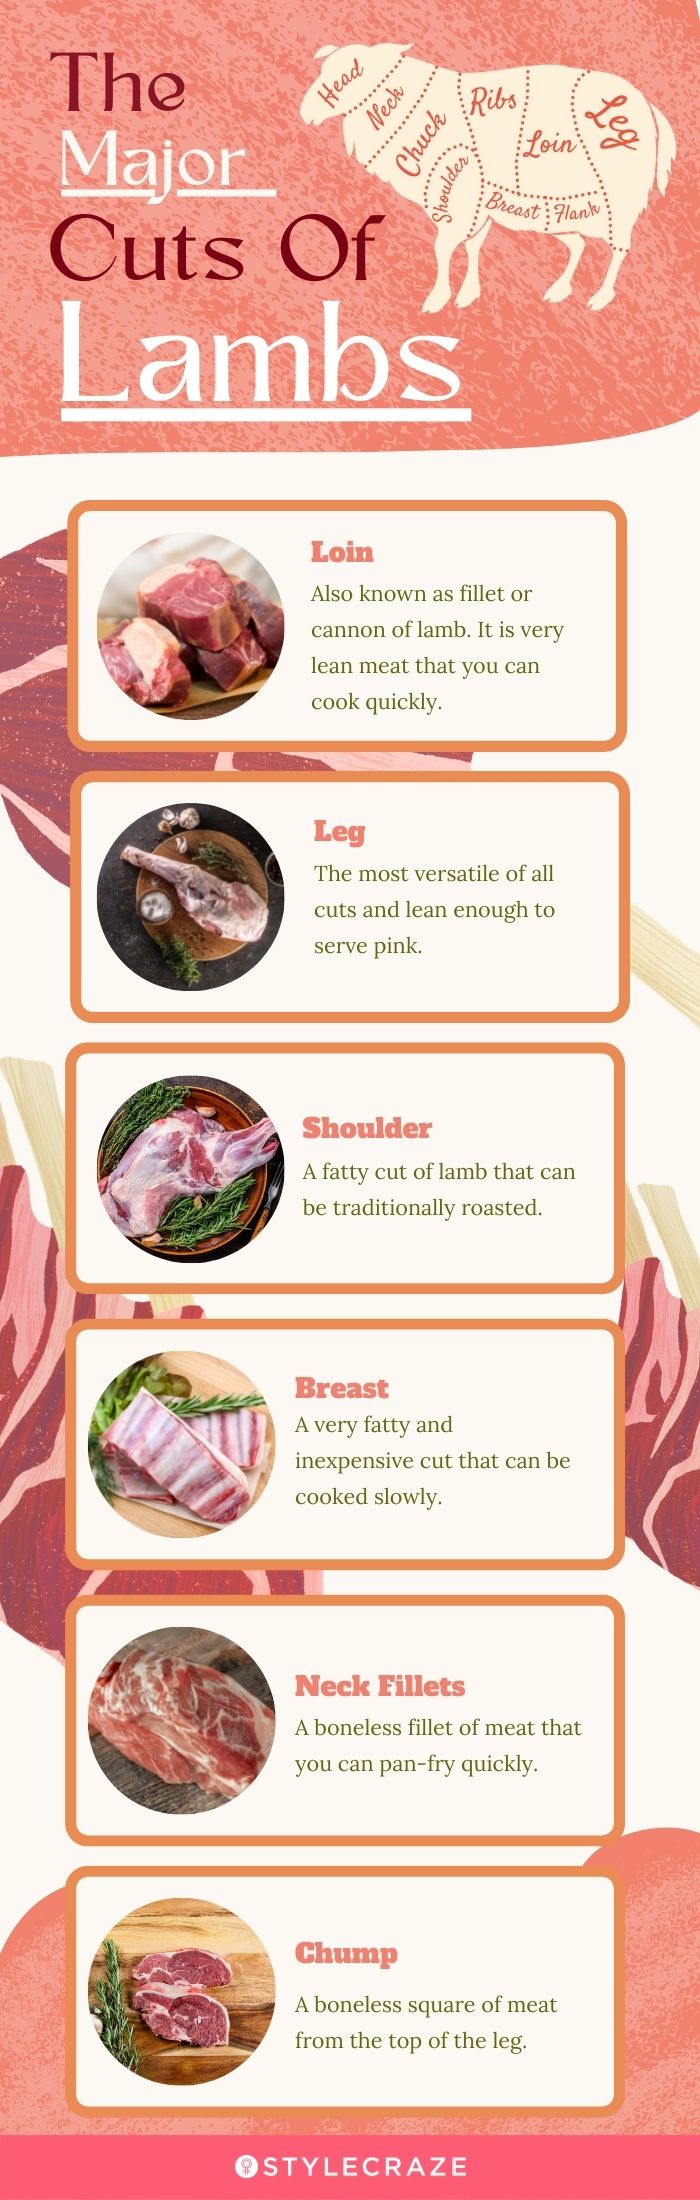 the major cuts of lambs [infographic]